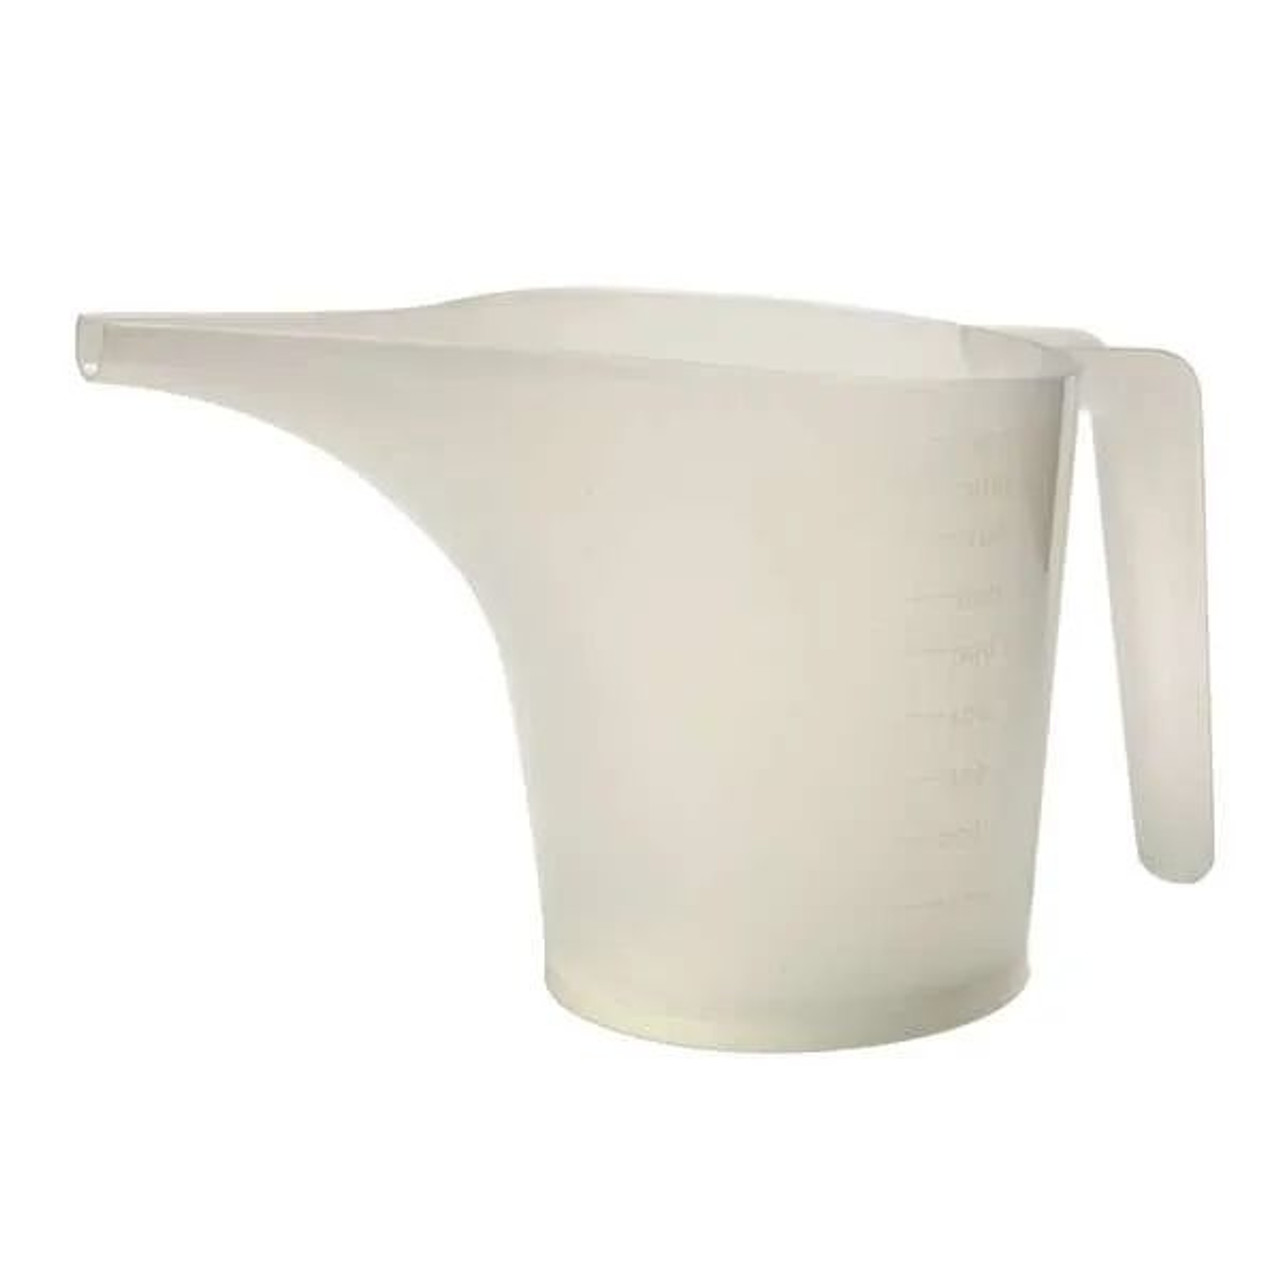 OXO GoodGrips Angled Liquid Measuring Cup, 1/4 Cup - Fante's Kitchen Shop -  Since 1906